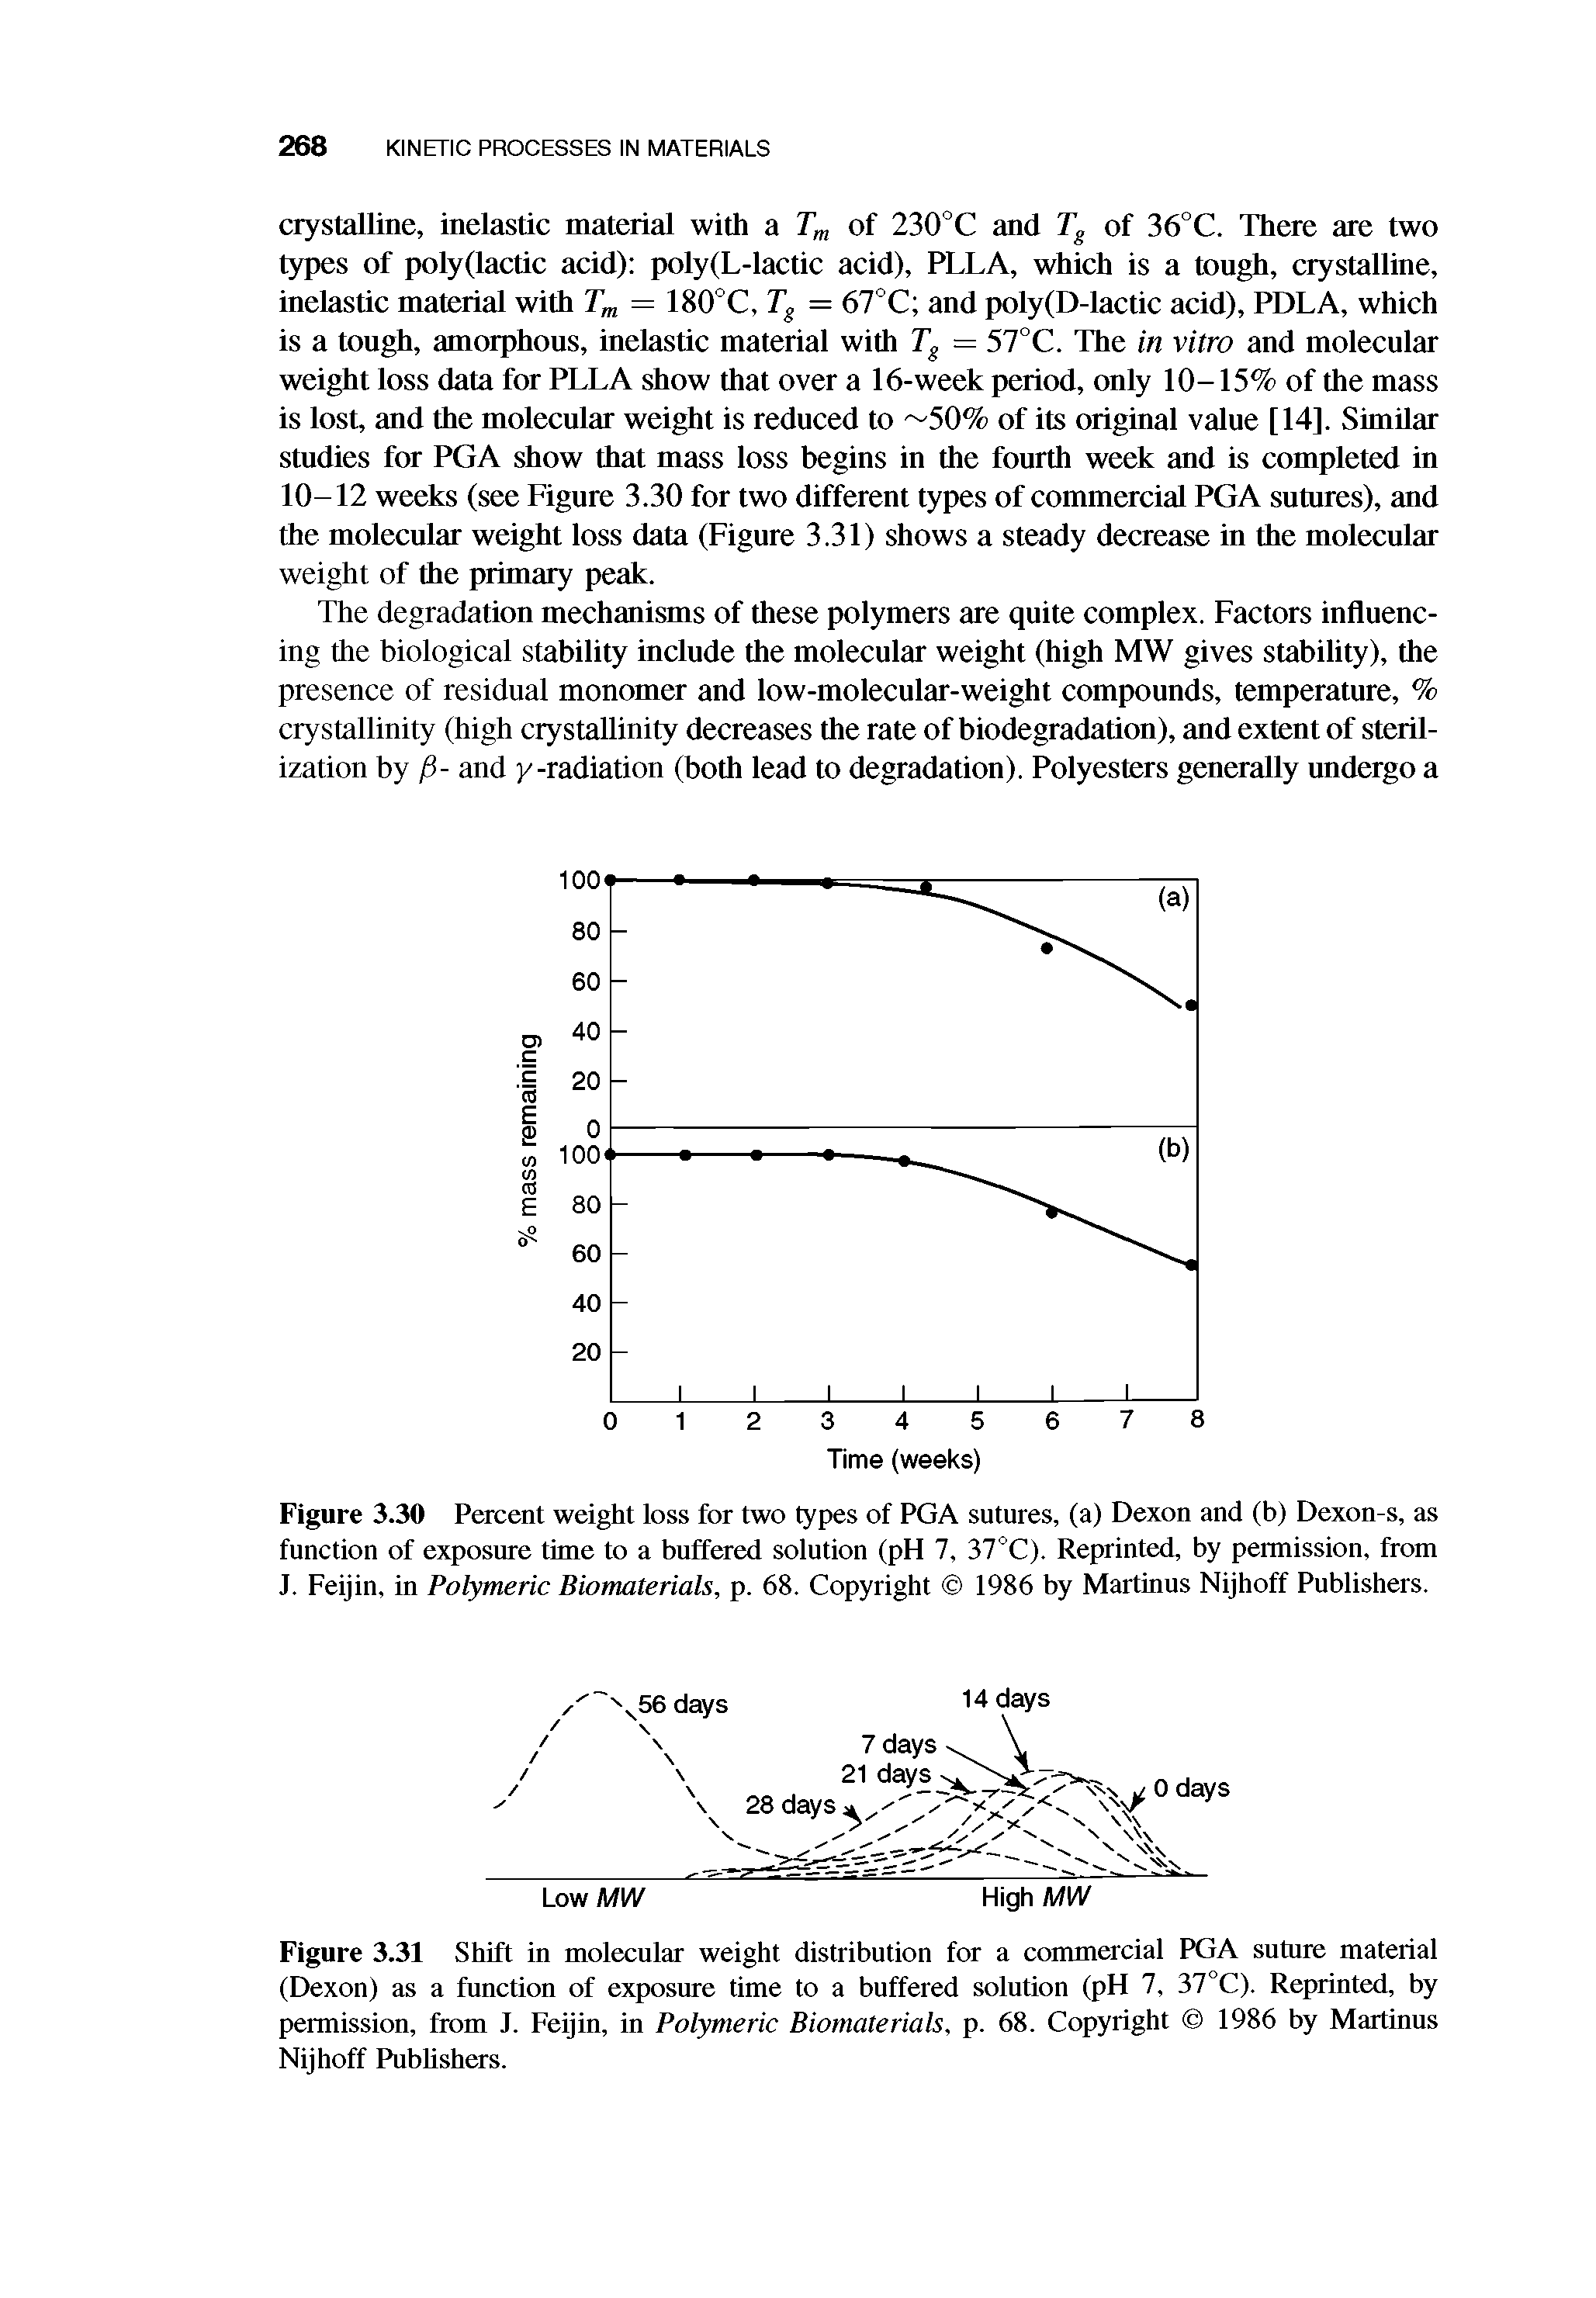 Figure 3.31 Shift in molecular weight distribution for a commercial PGA suture material (Dexon) as a function of exposure time to a buffered solution (pH 7, 37°C). Reprinted, by permission, from J. Feijin, in Polymeric Biomaterials, p. 68. Copyright 1986 by Martinus Nijhoff Pubhshers.